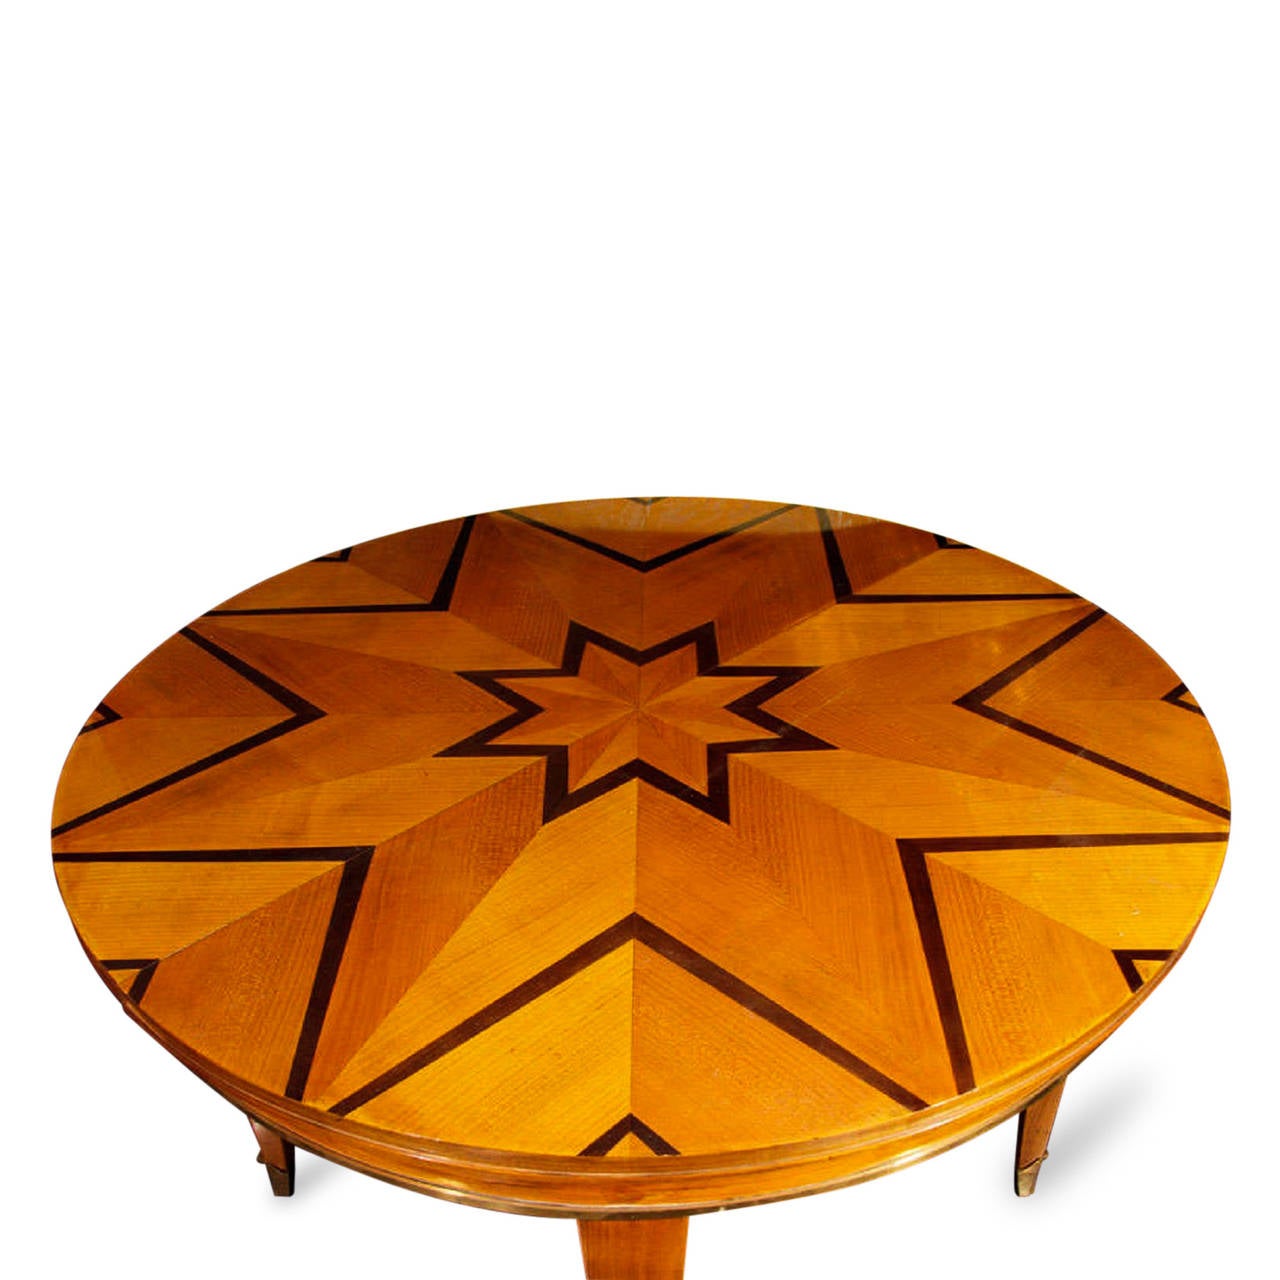 Mid-20th Century Center Table with Inlaid Starburst Pattern by Dominique, French, 1930s